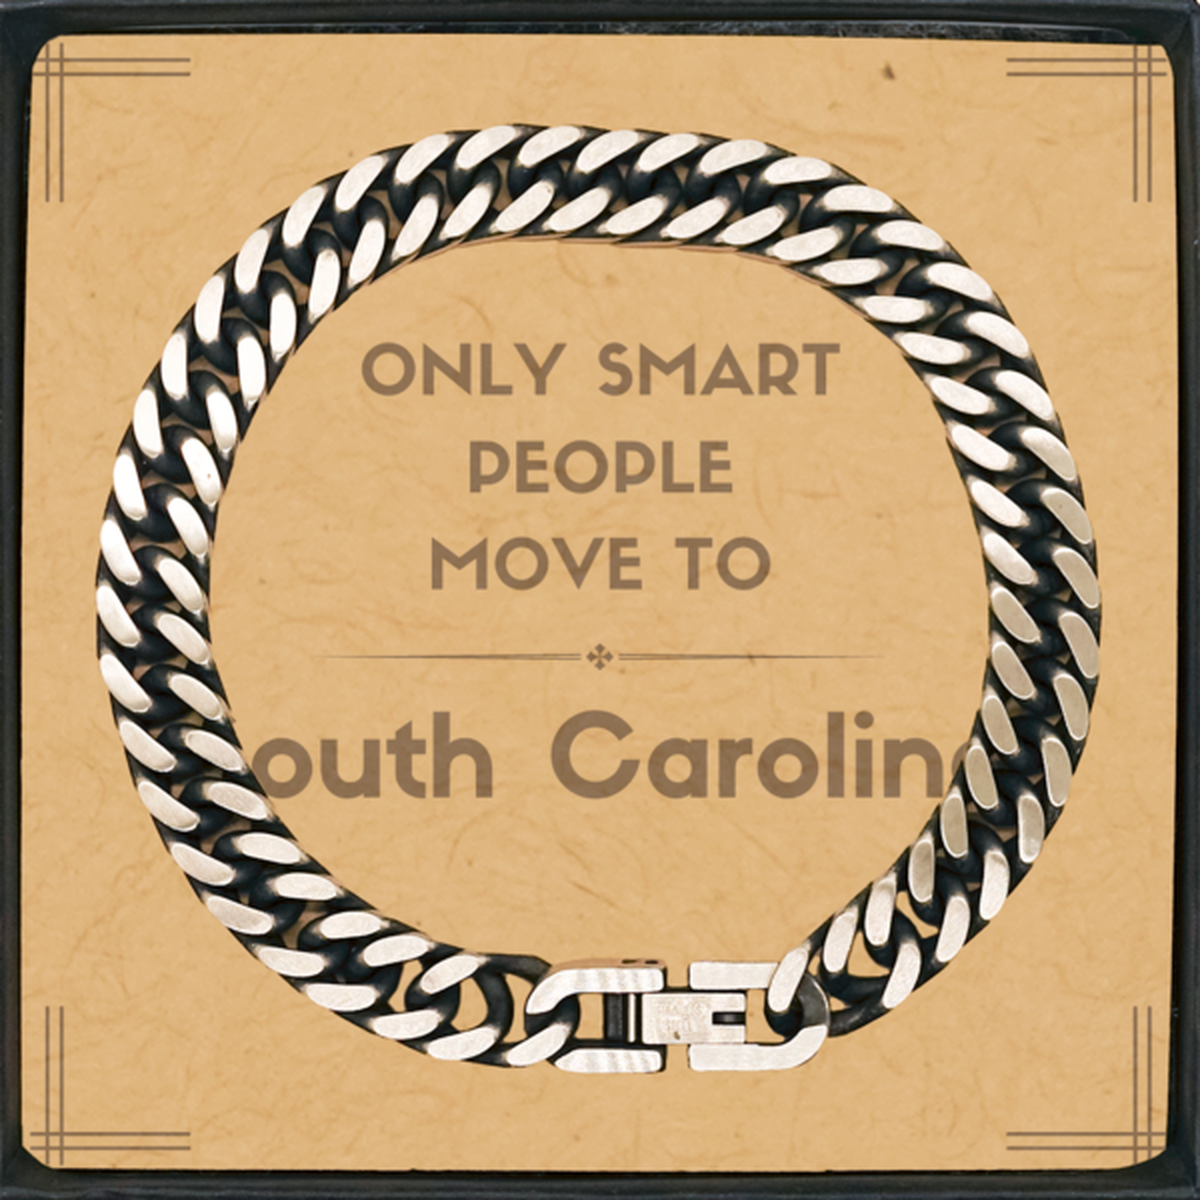 Only smart people move to South Carolina Cuban Link Chain Bracelet, Message Card Gifts For South Carolina, Move to South Carolina Gifts for Friends Coworker Funny Saying Quote